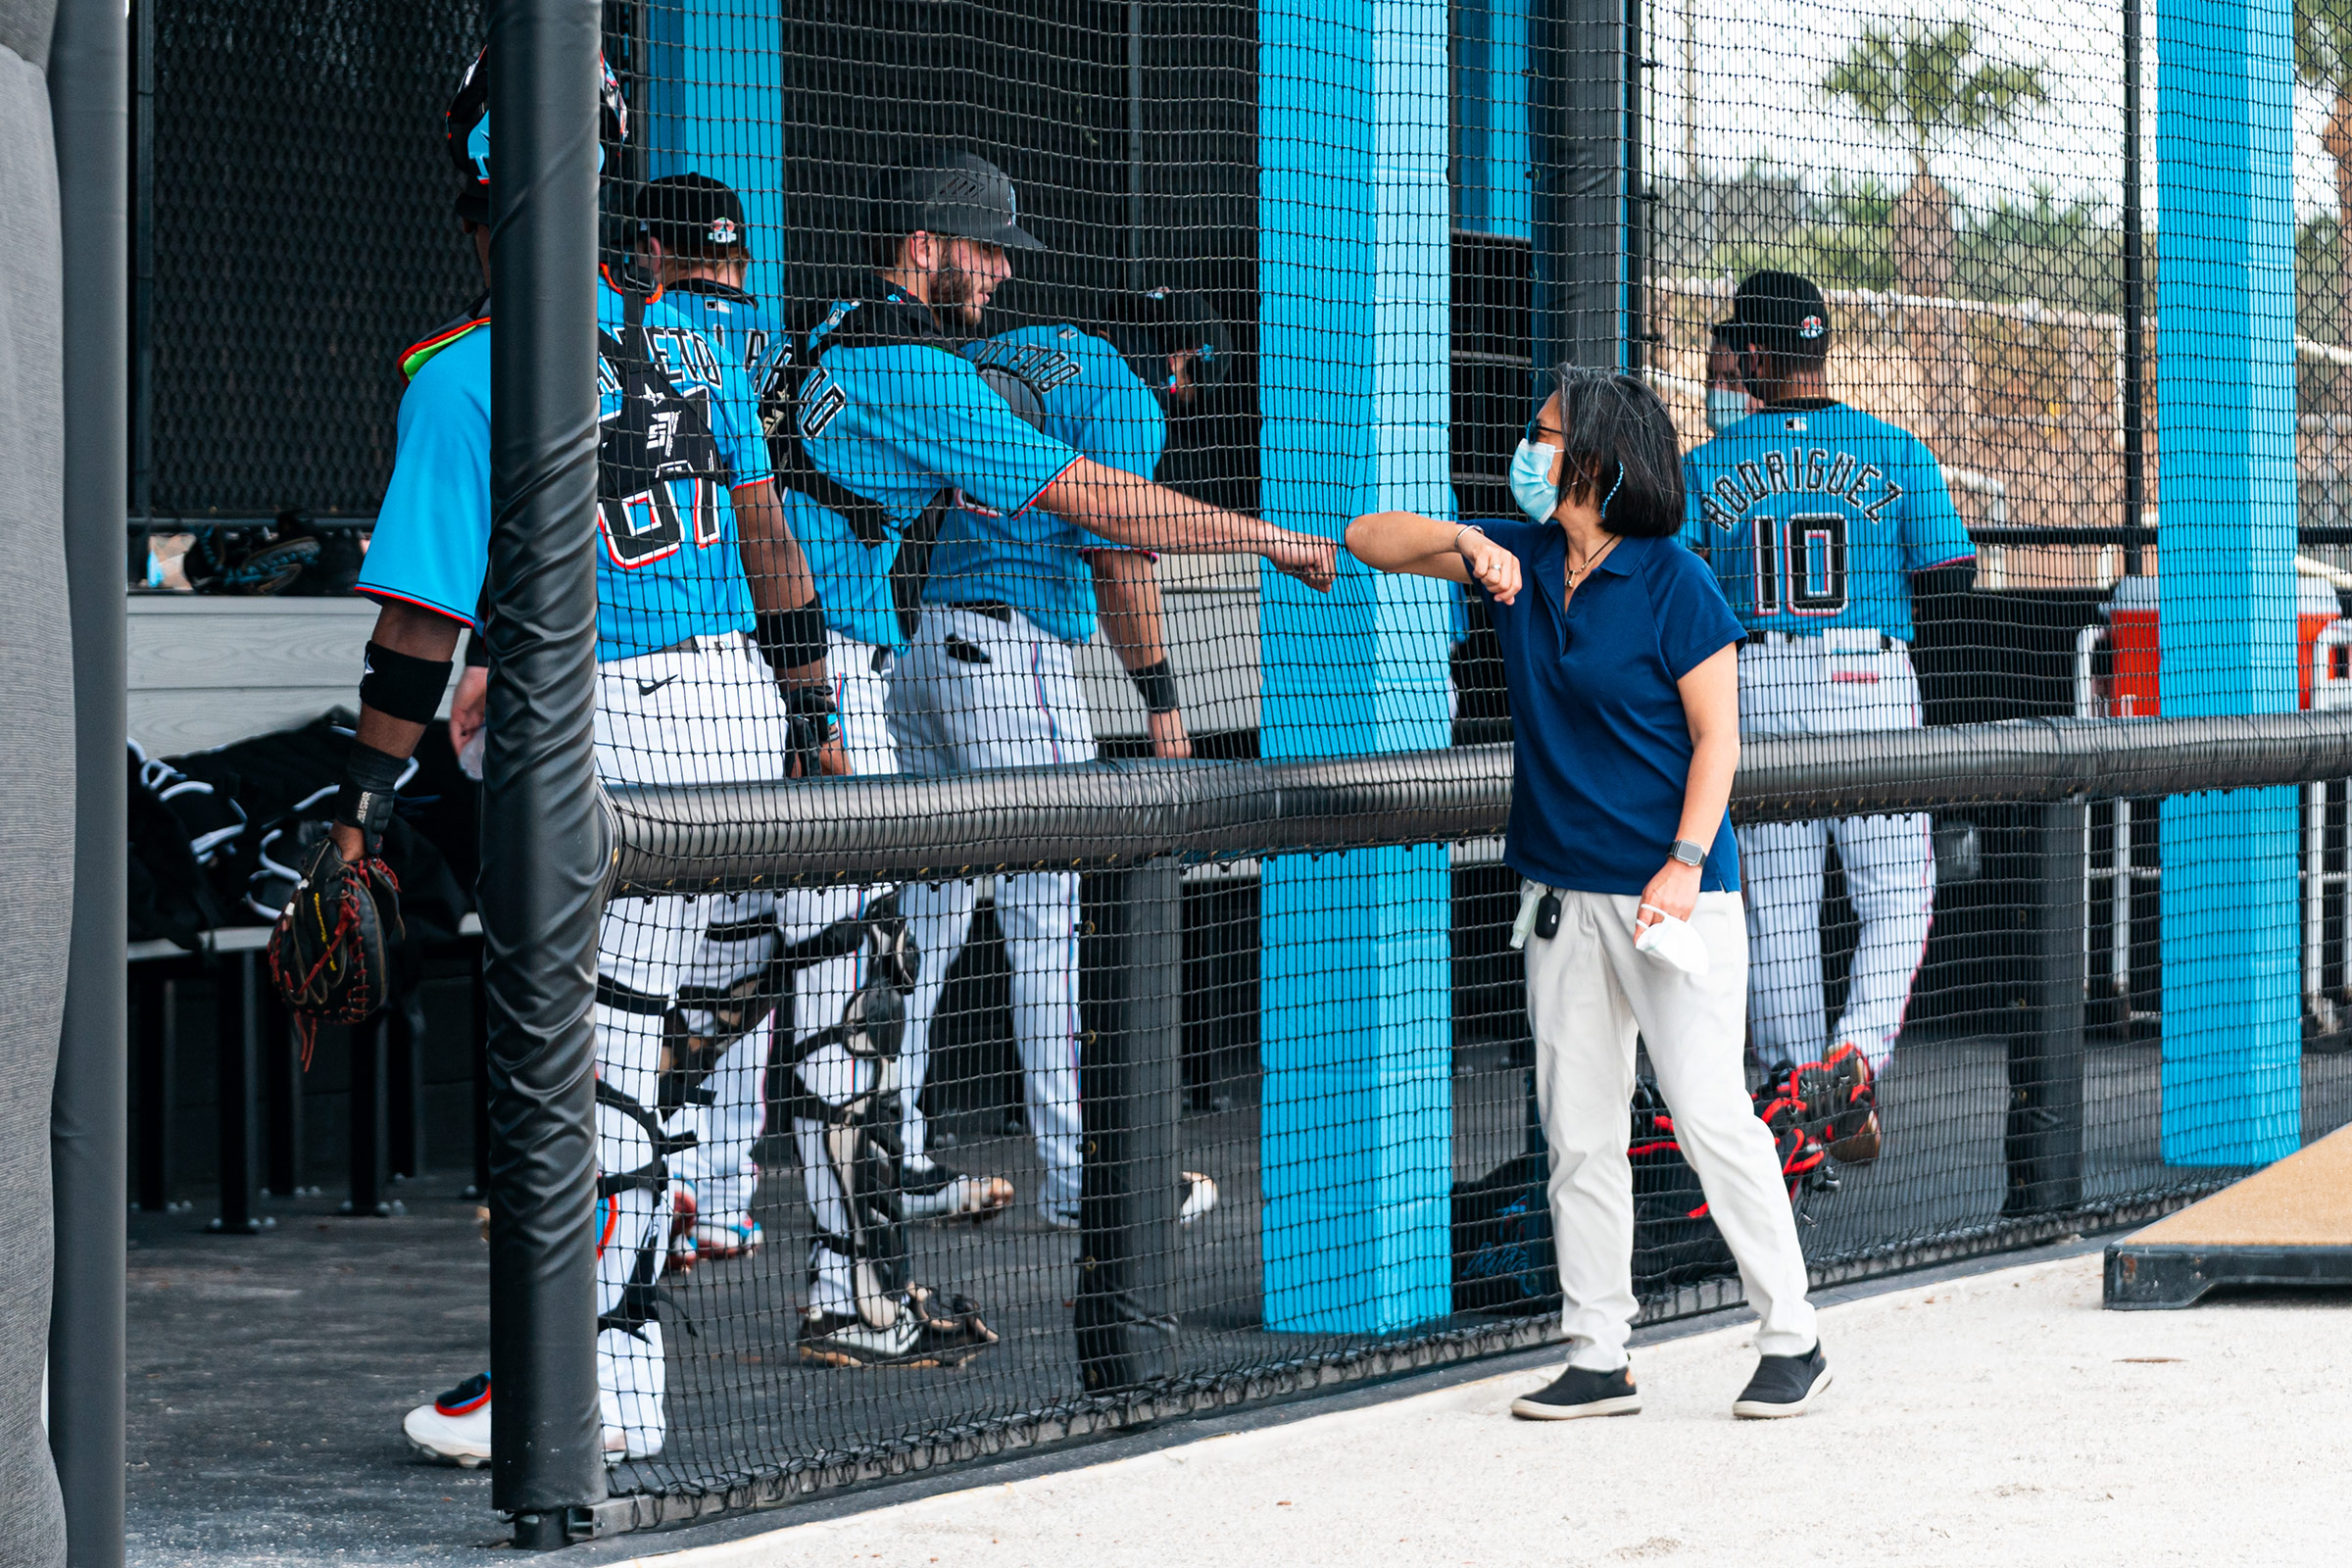 Ng greets Miami Marlins prospect Cameron Barstad on Feb. 18, the opening day of spring training, in Jupiter, Fla. (Miami Marlins)